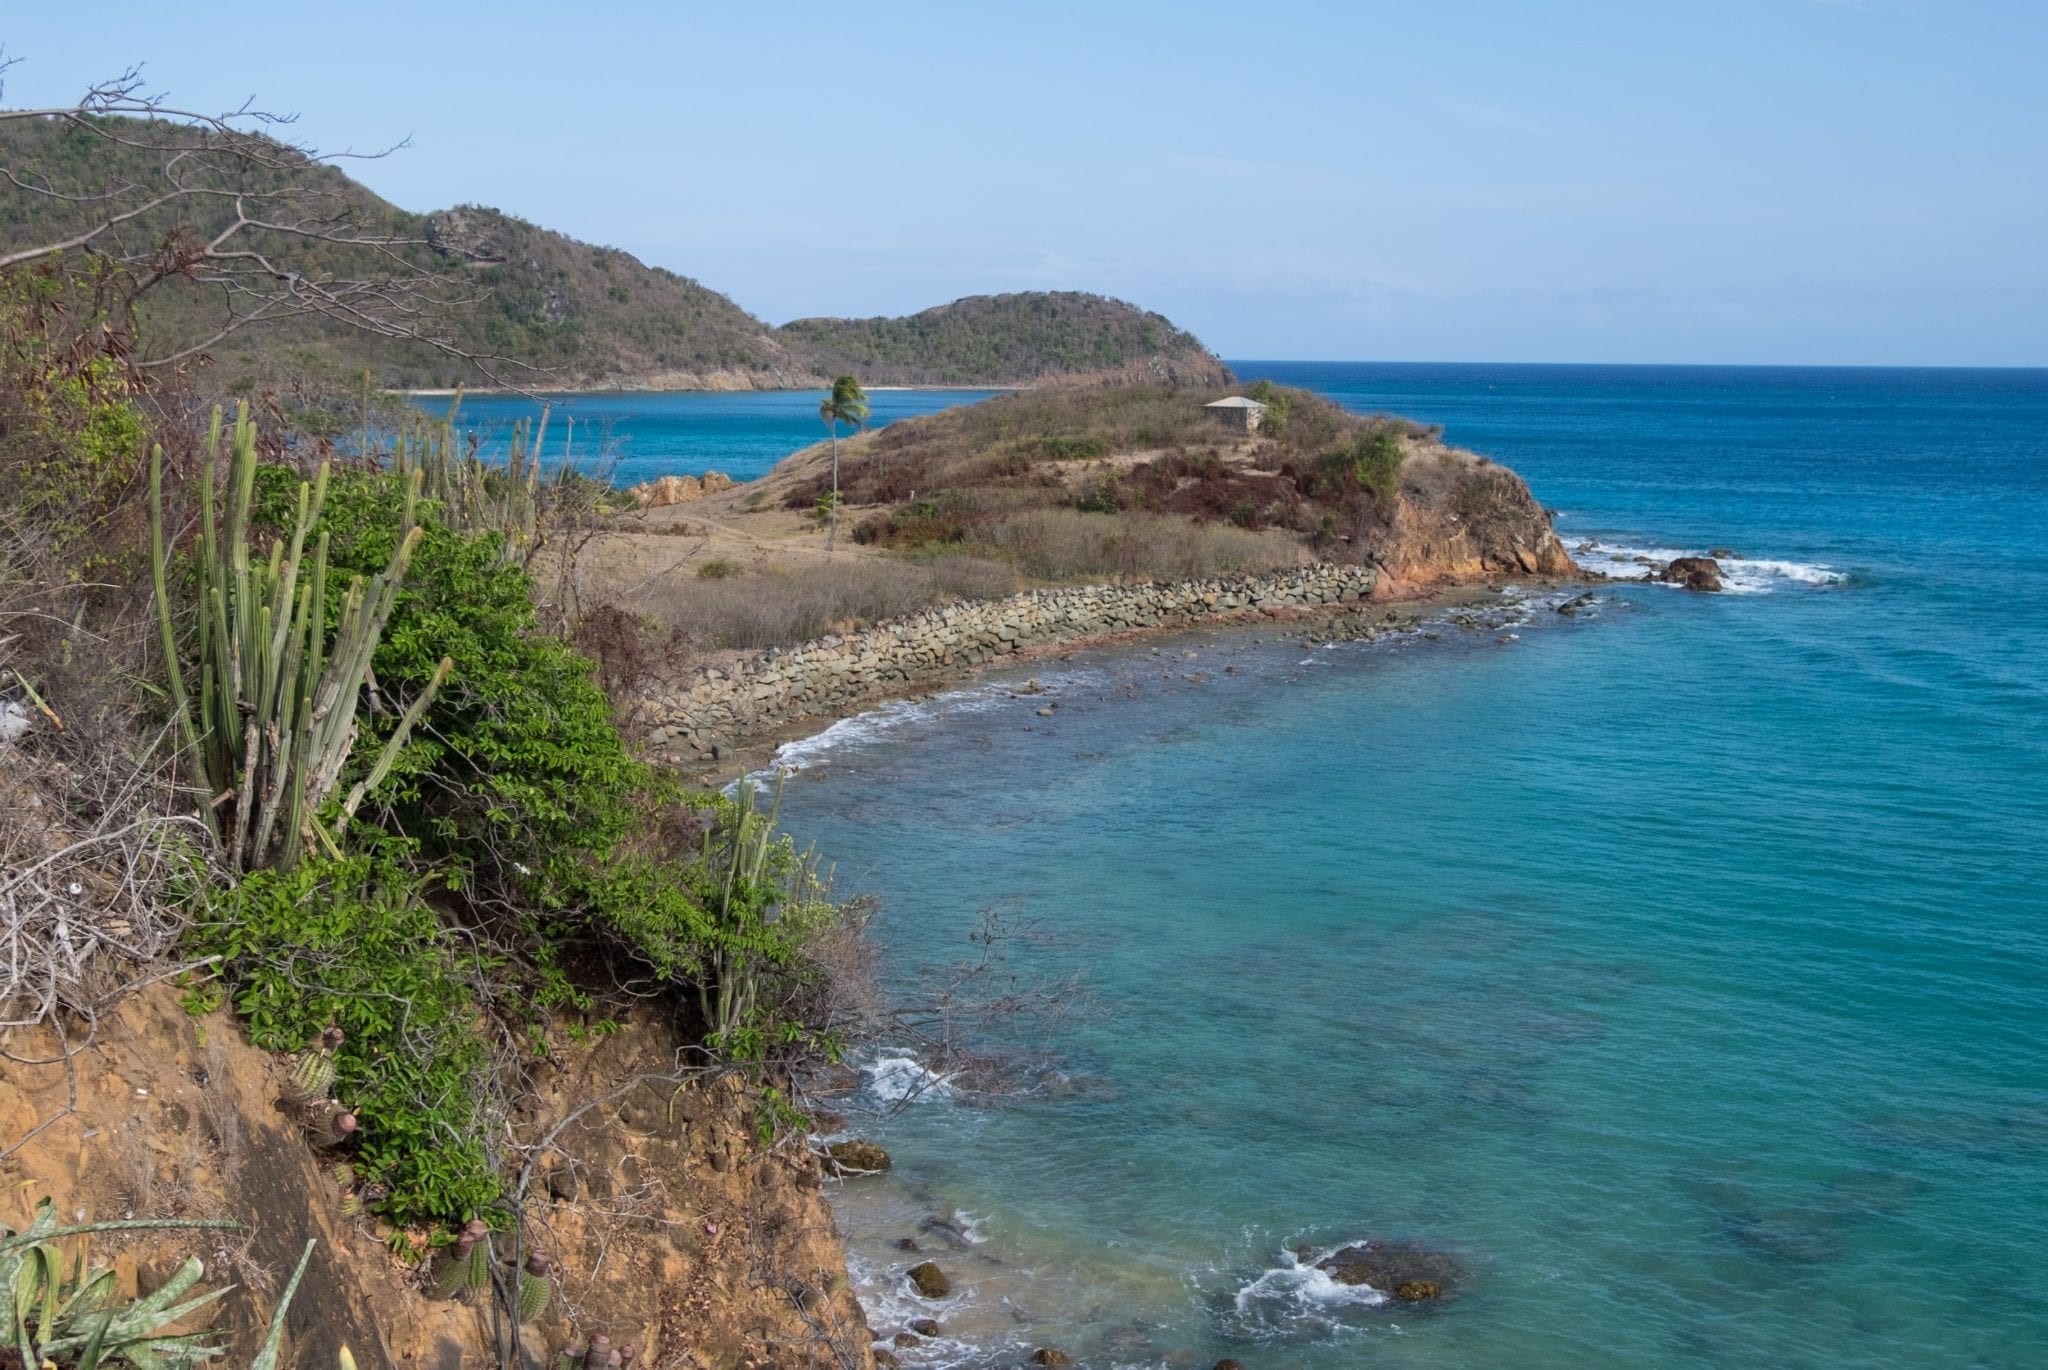 View from a cliff in Antigua: a peninsula rises out into the bright teal sea on the right, while a grove of cacti grows on the left.